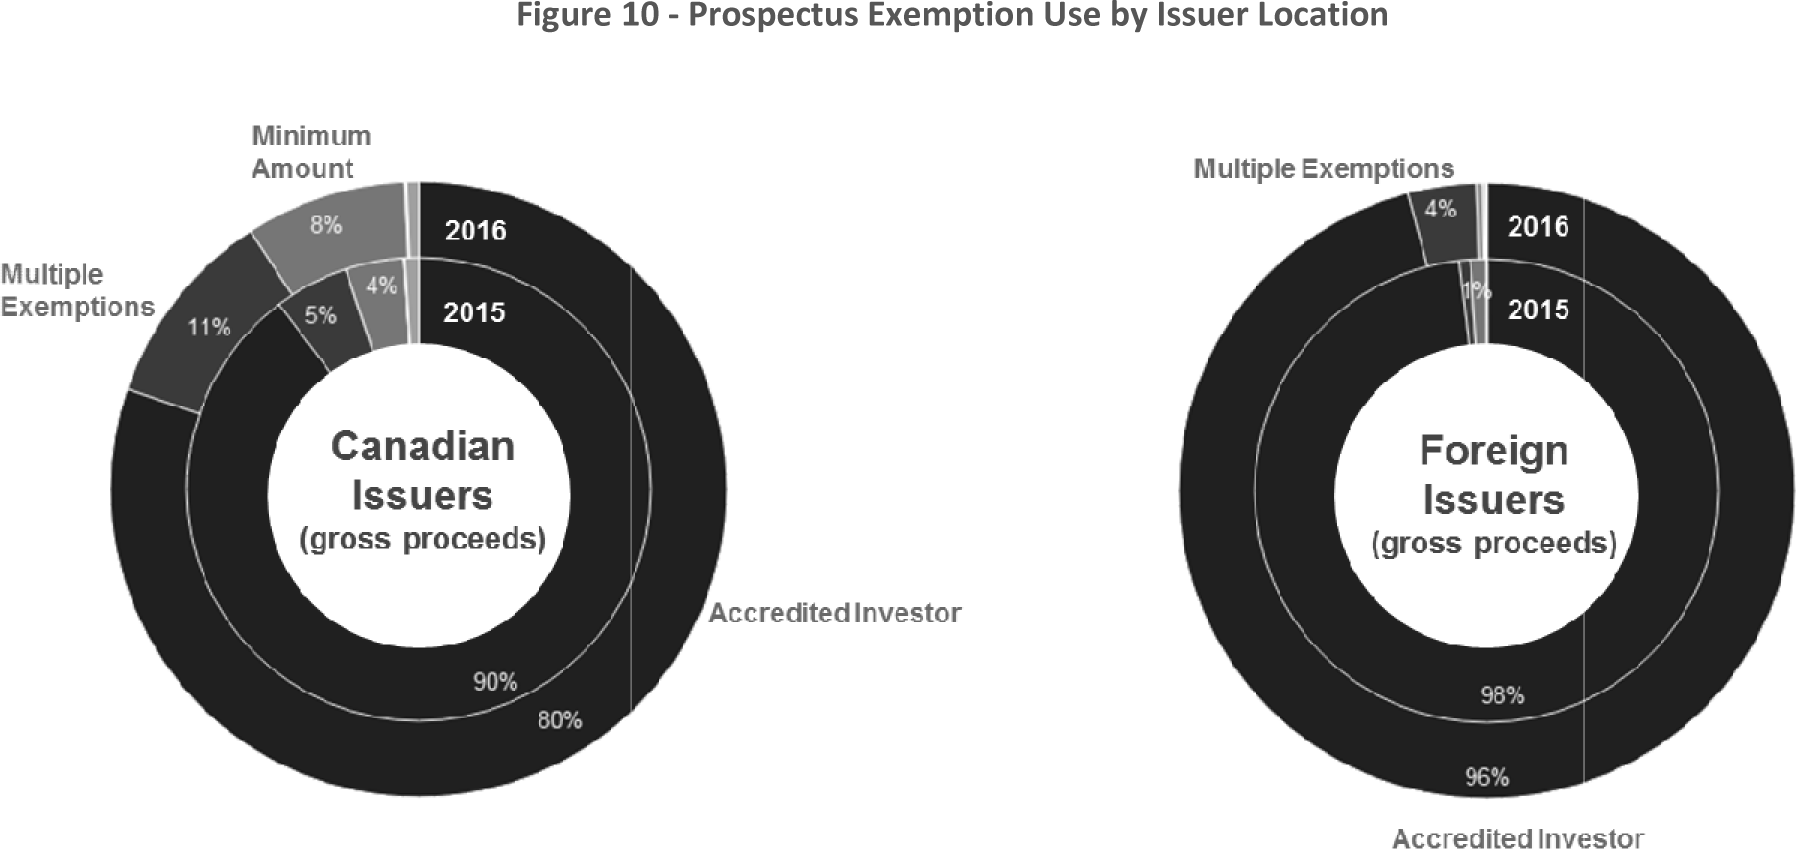 Figure 10 -- Prospectus Exemption Use by Issuer Location